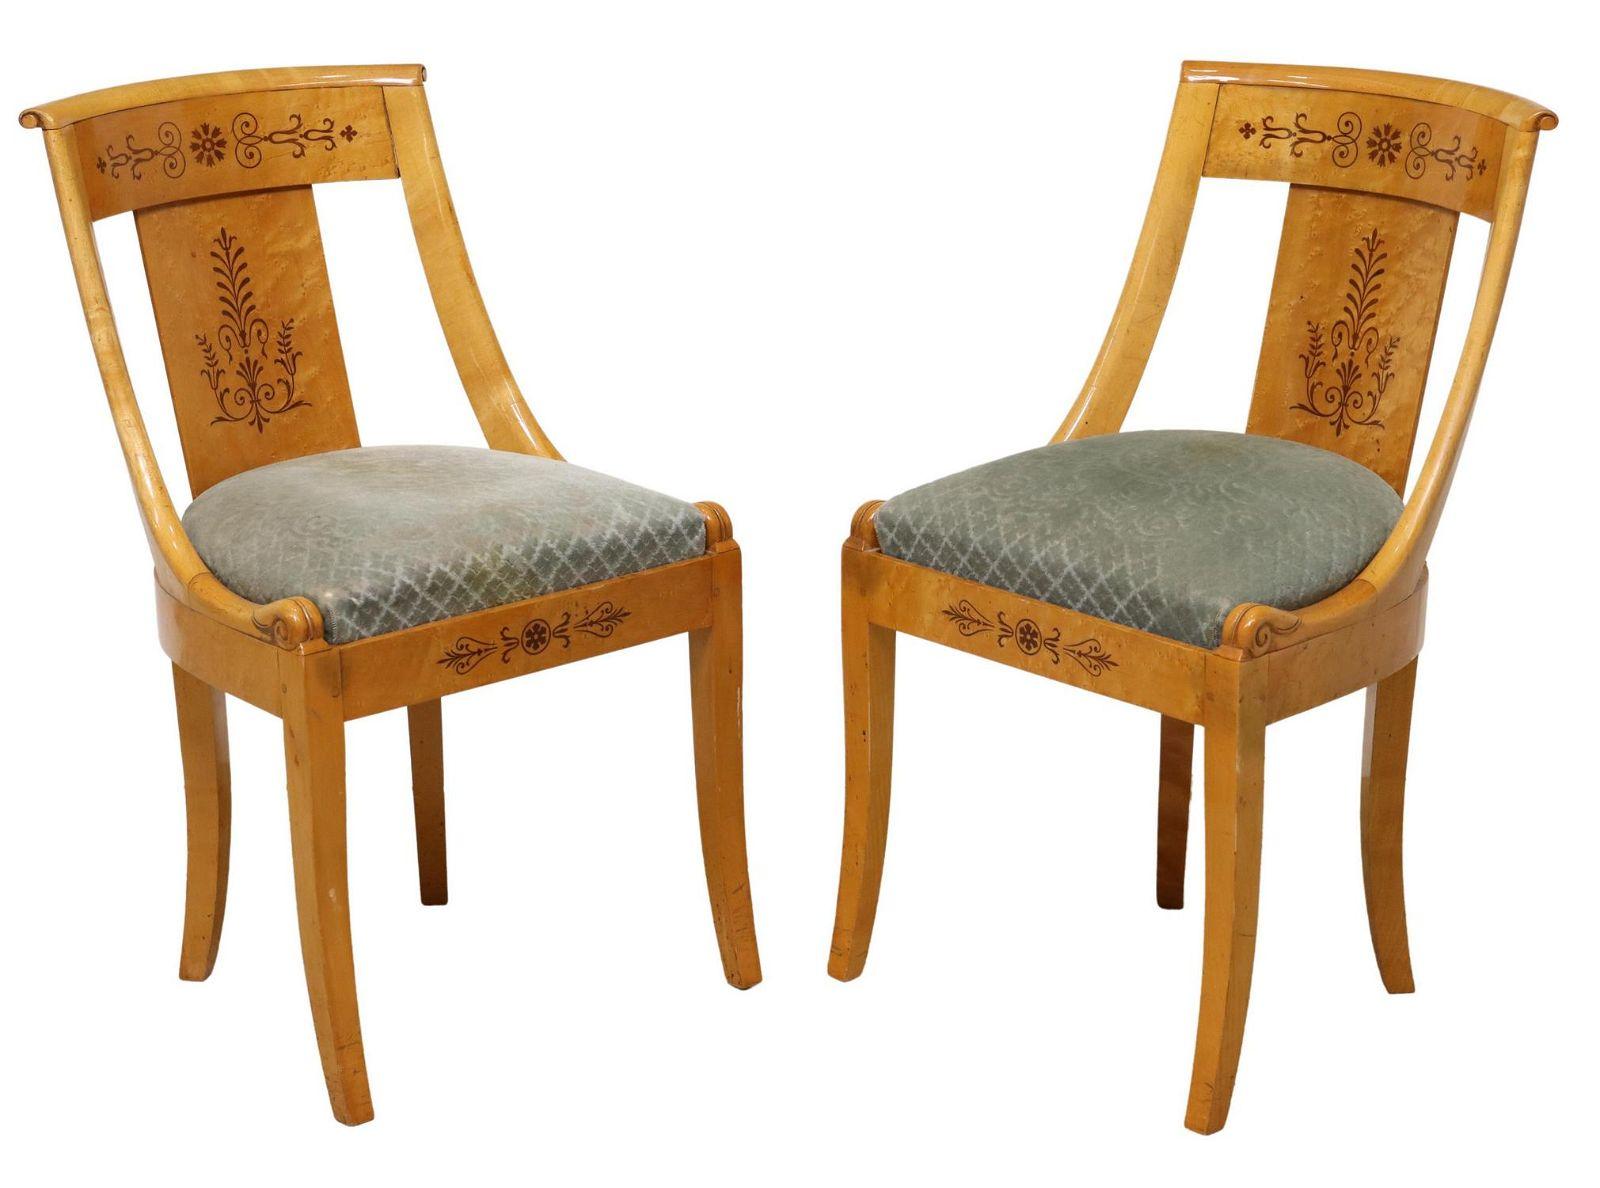 Vintage French Empire style Birdseye maple (reminiscent and very similar to Burl wood) side chairs, late 20th c. Chairs feature a curved top rail, center splat with marquetry inlay, slip seat, on saber legs.

Dimensions
approx 32